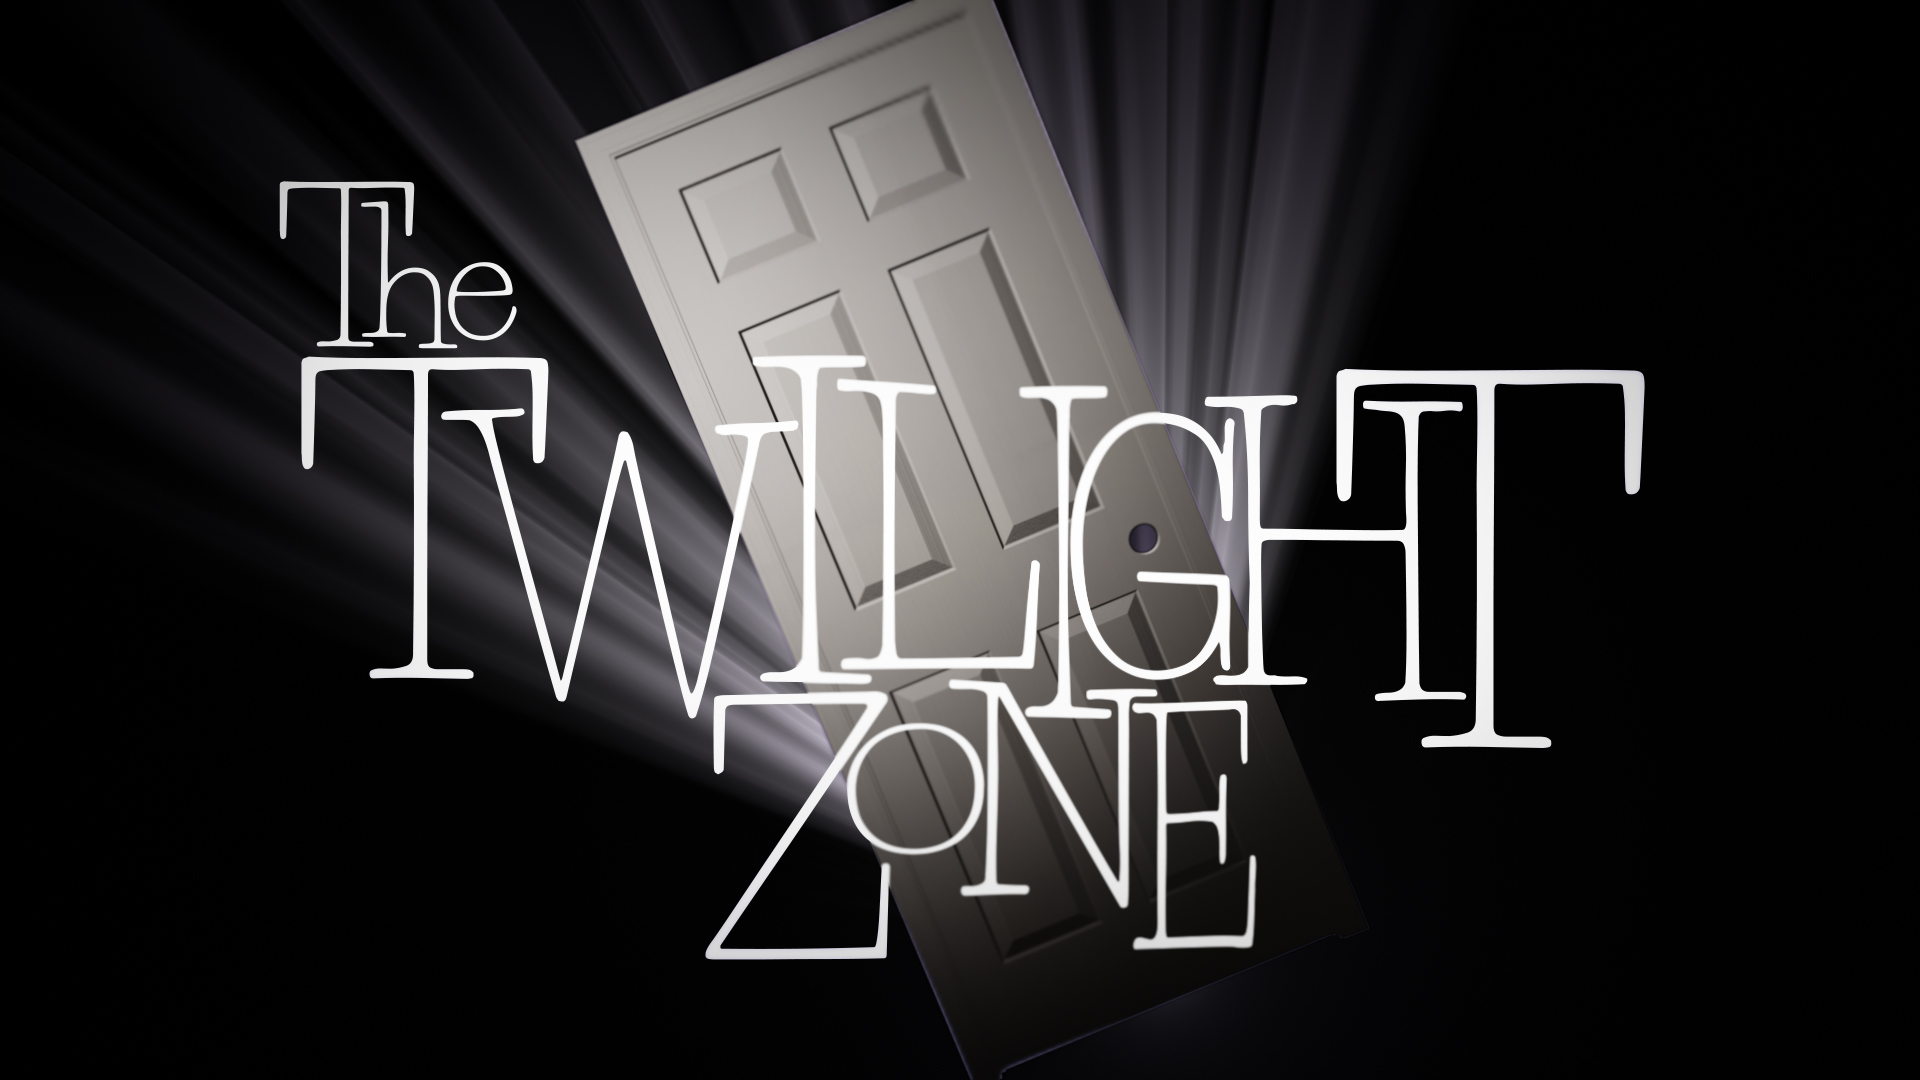 The Twilight Zone Door Logo By Timcreed